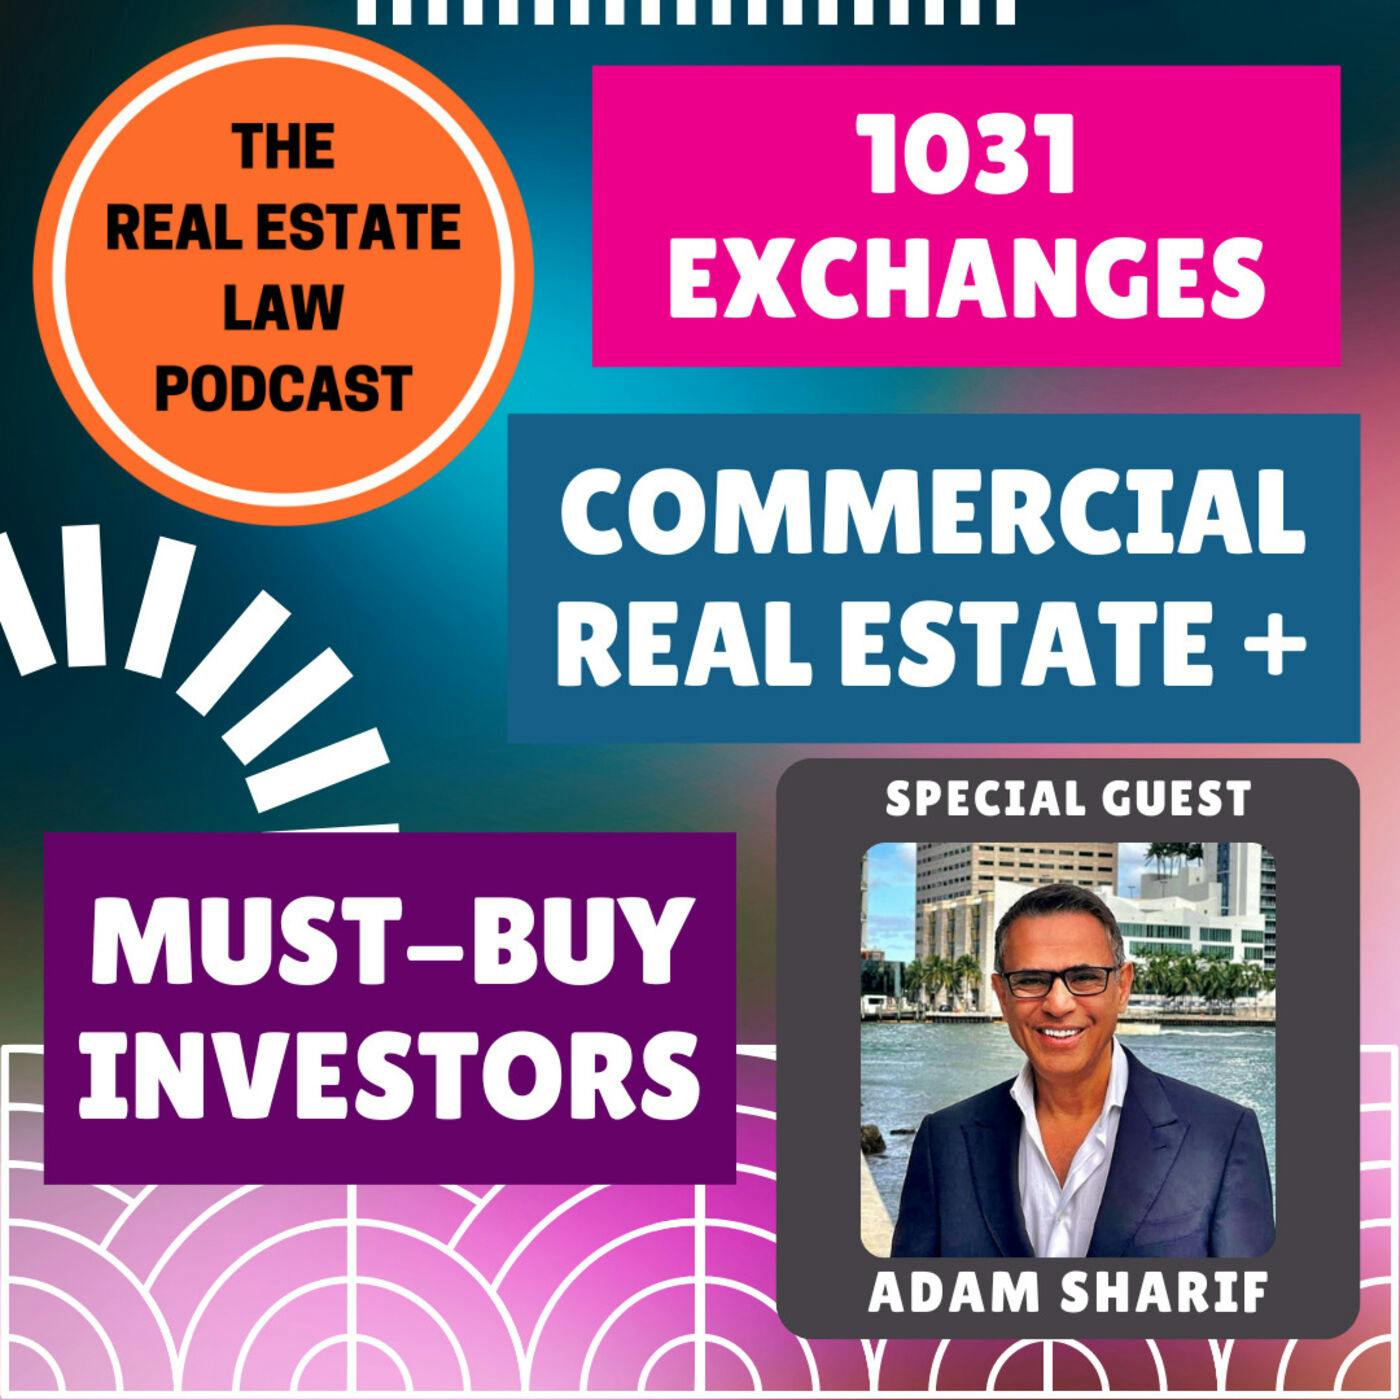 1031 Exchanges, Commercial Real Estate, and Must-Buy Investors with nxtCRE Founder Adam Sharif